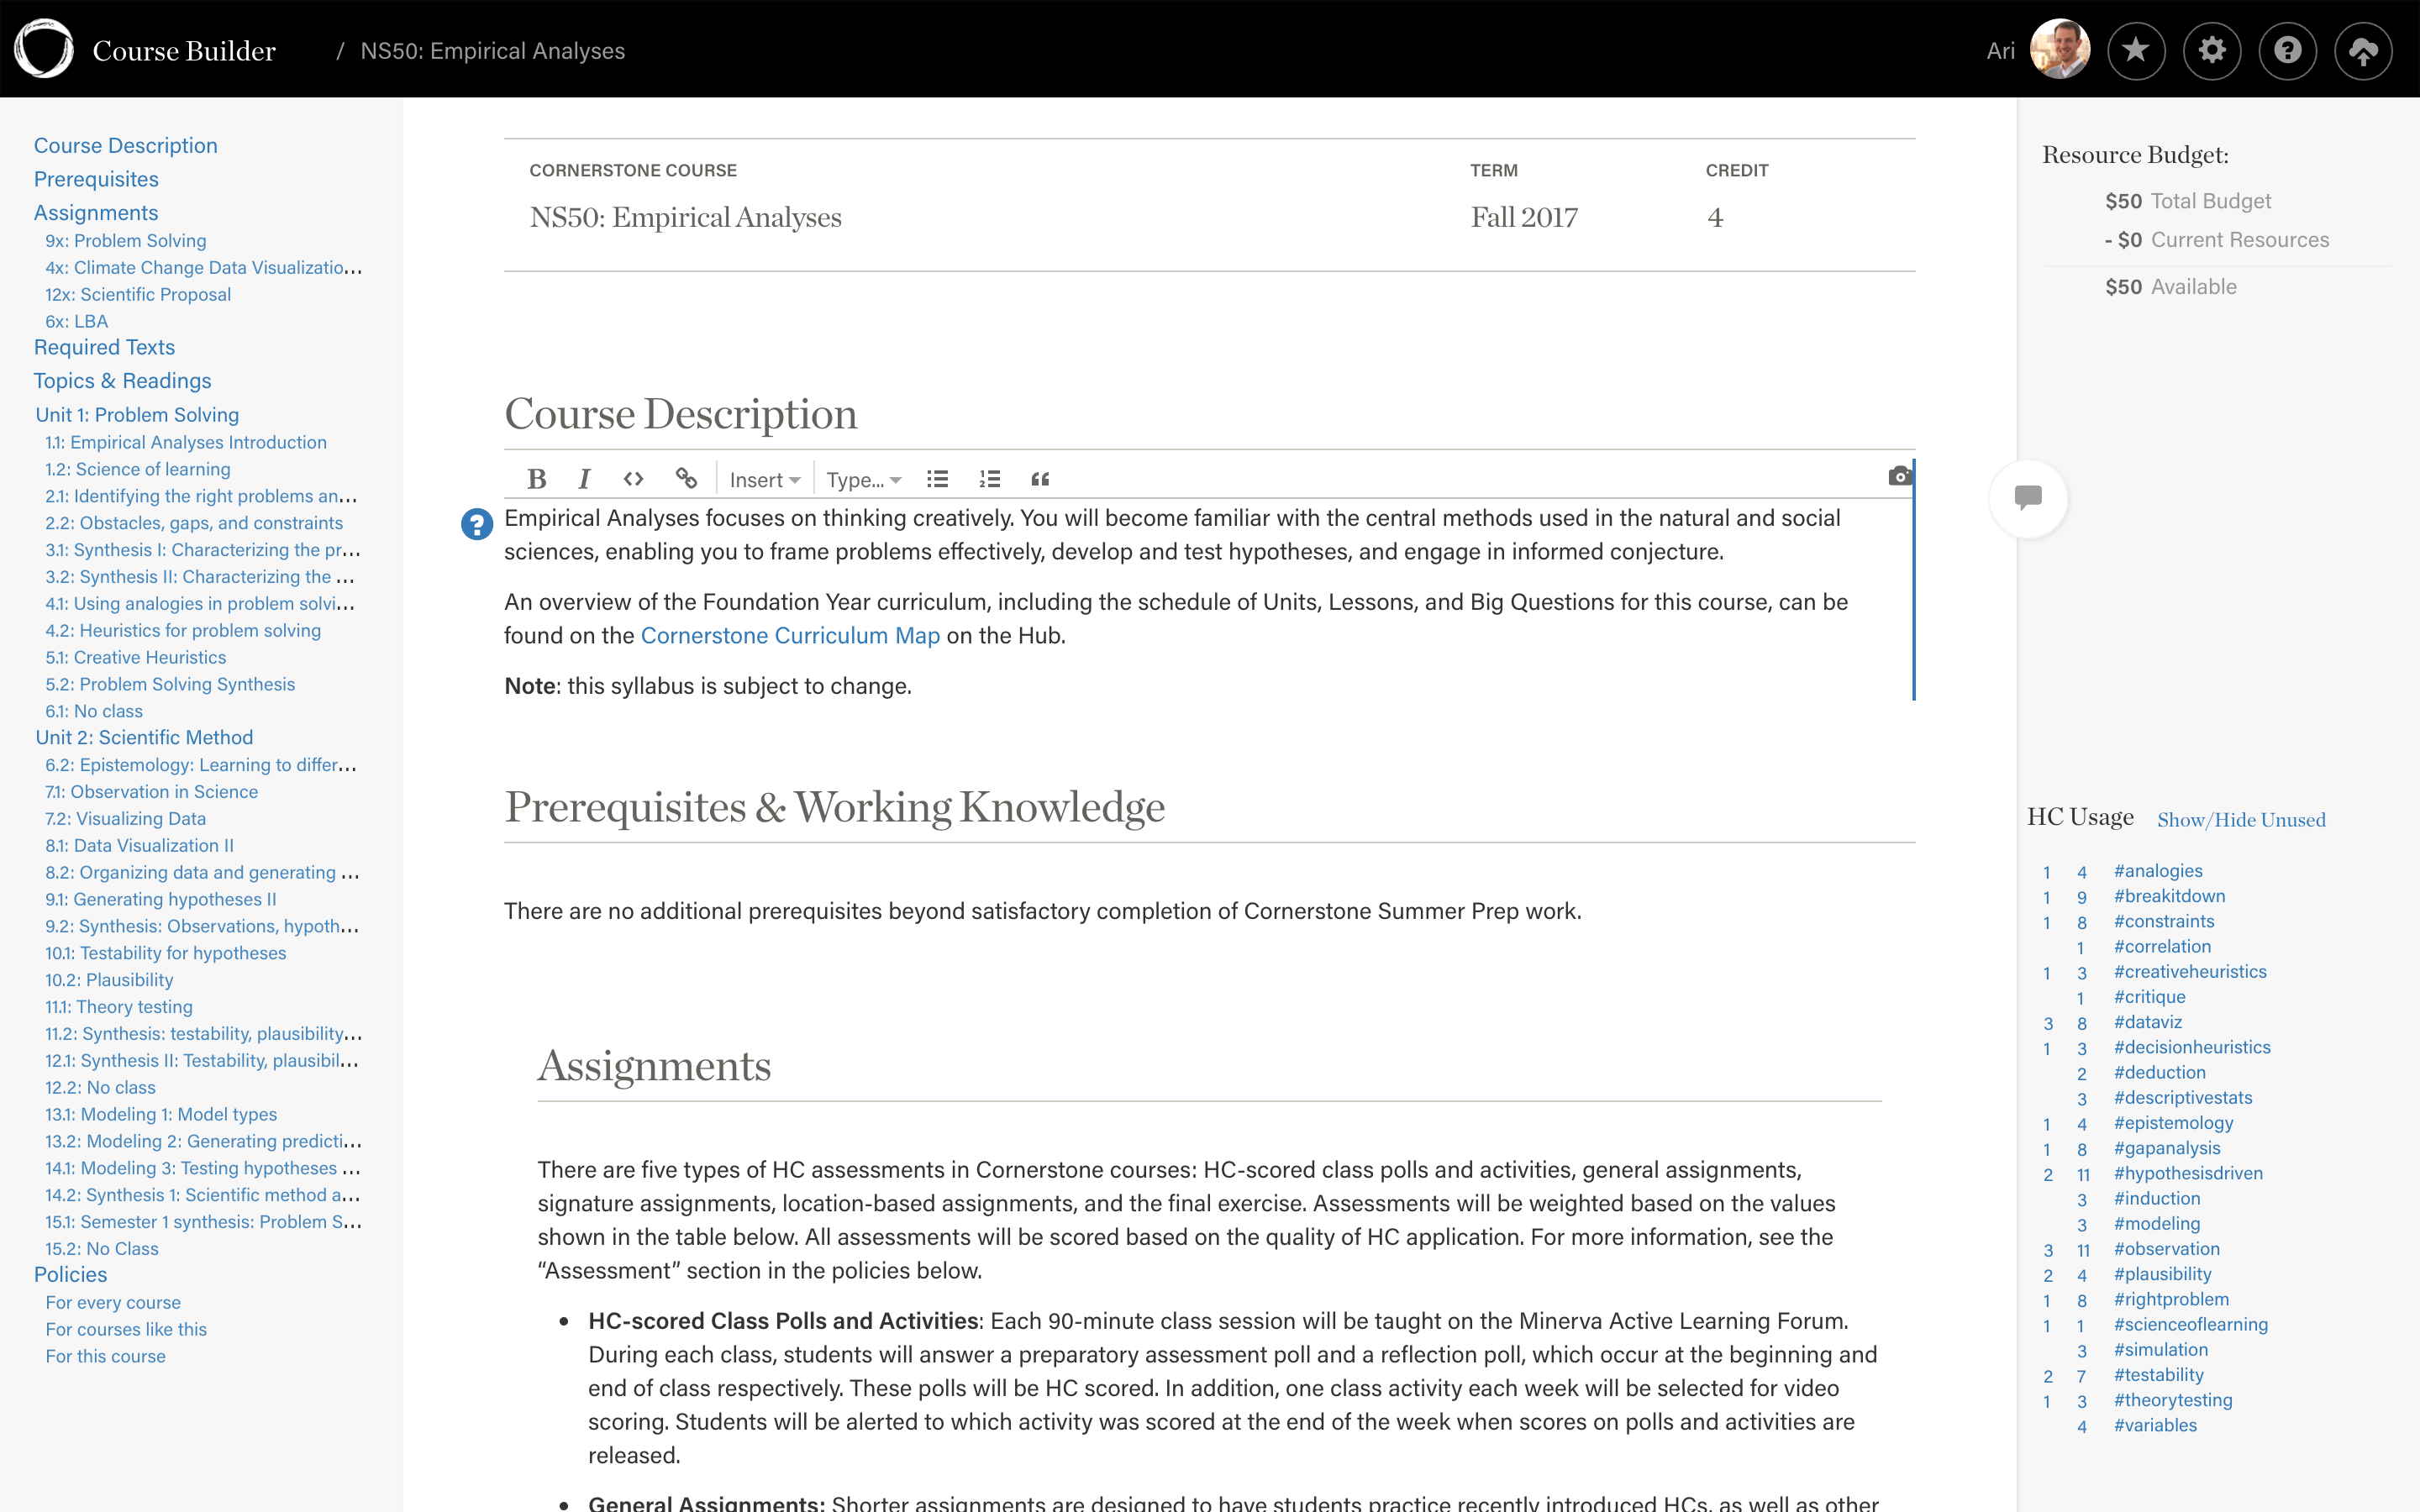 Screenshot of a course syllabus being edited in Course Builder